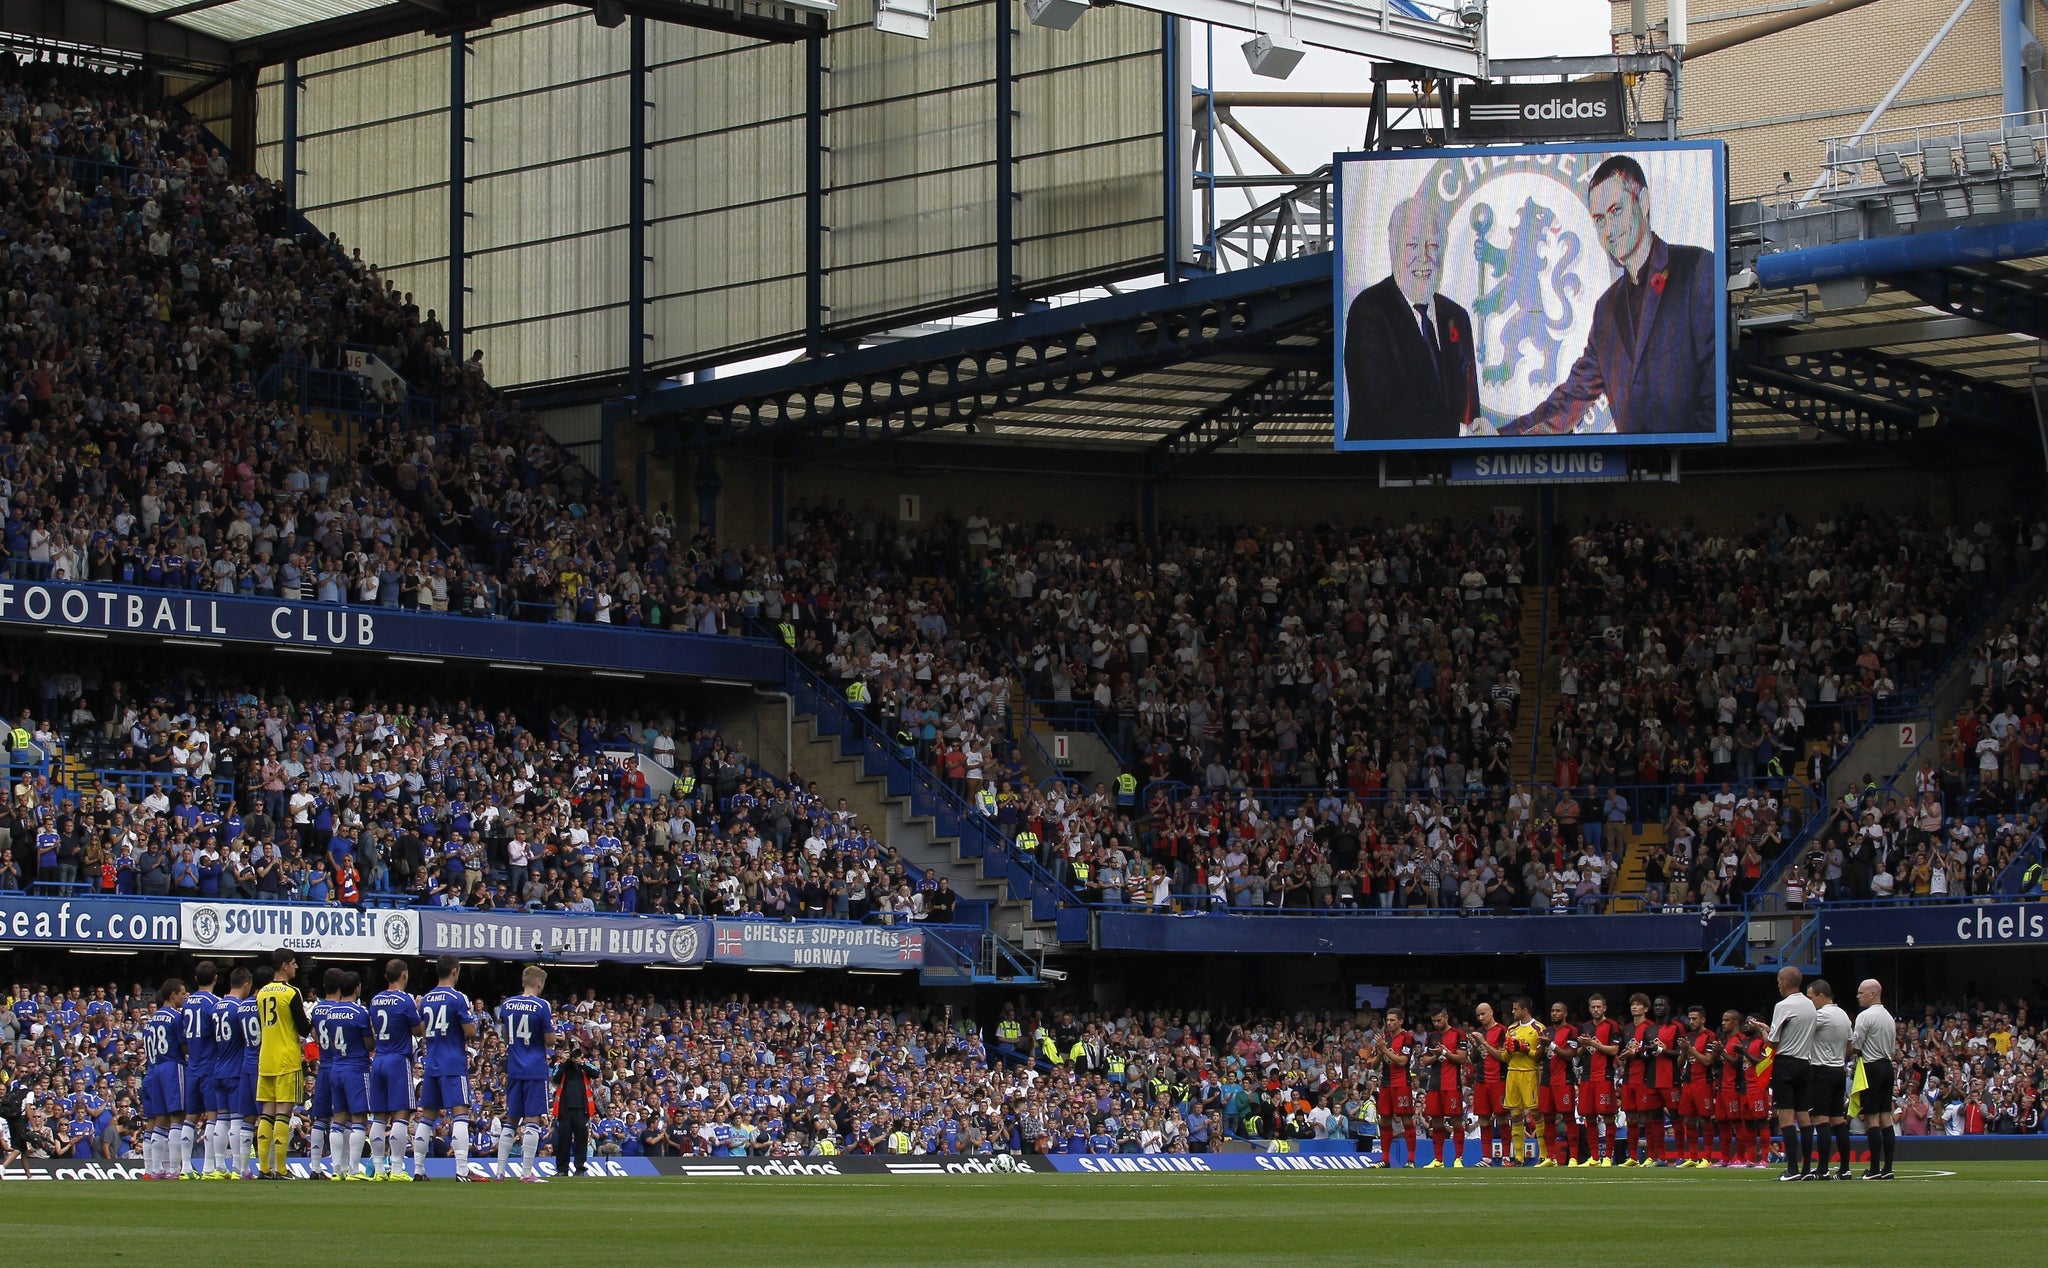 The two sides paid tribute to the late Richard Attenborough before kick-off